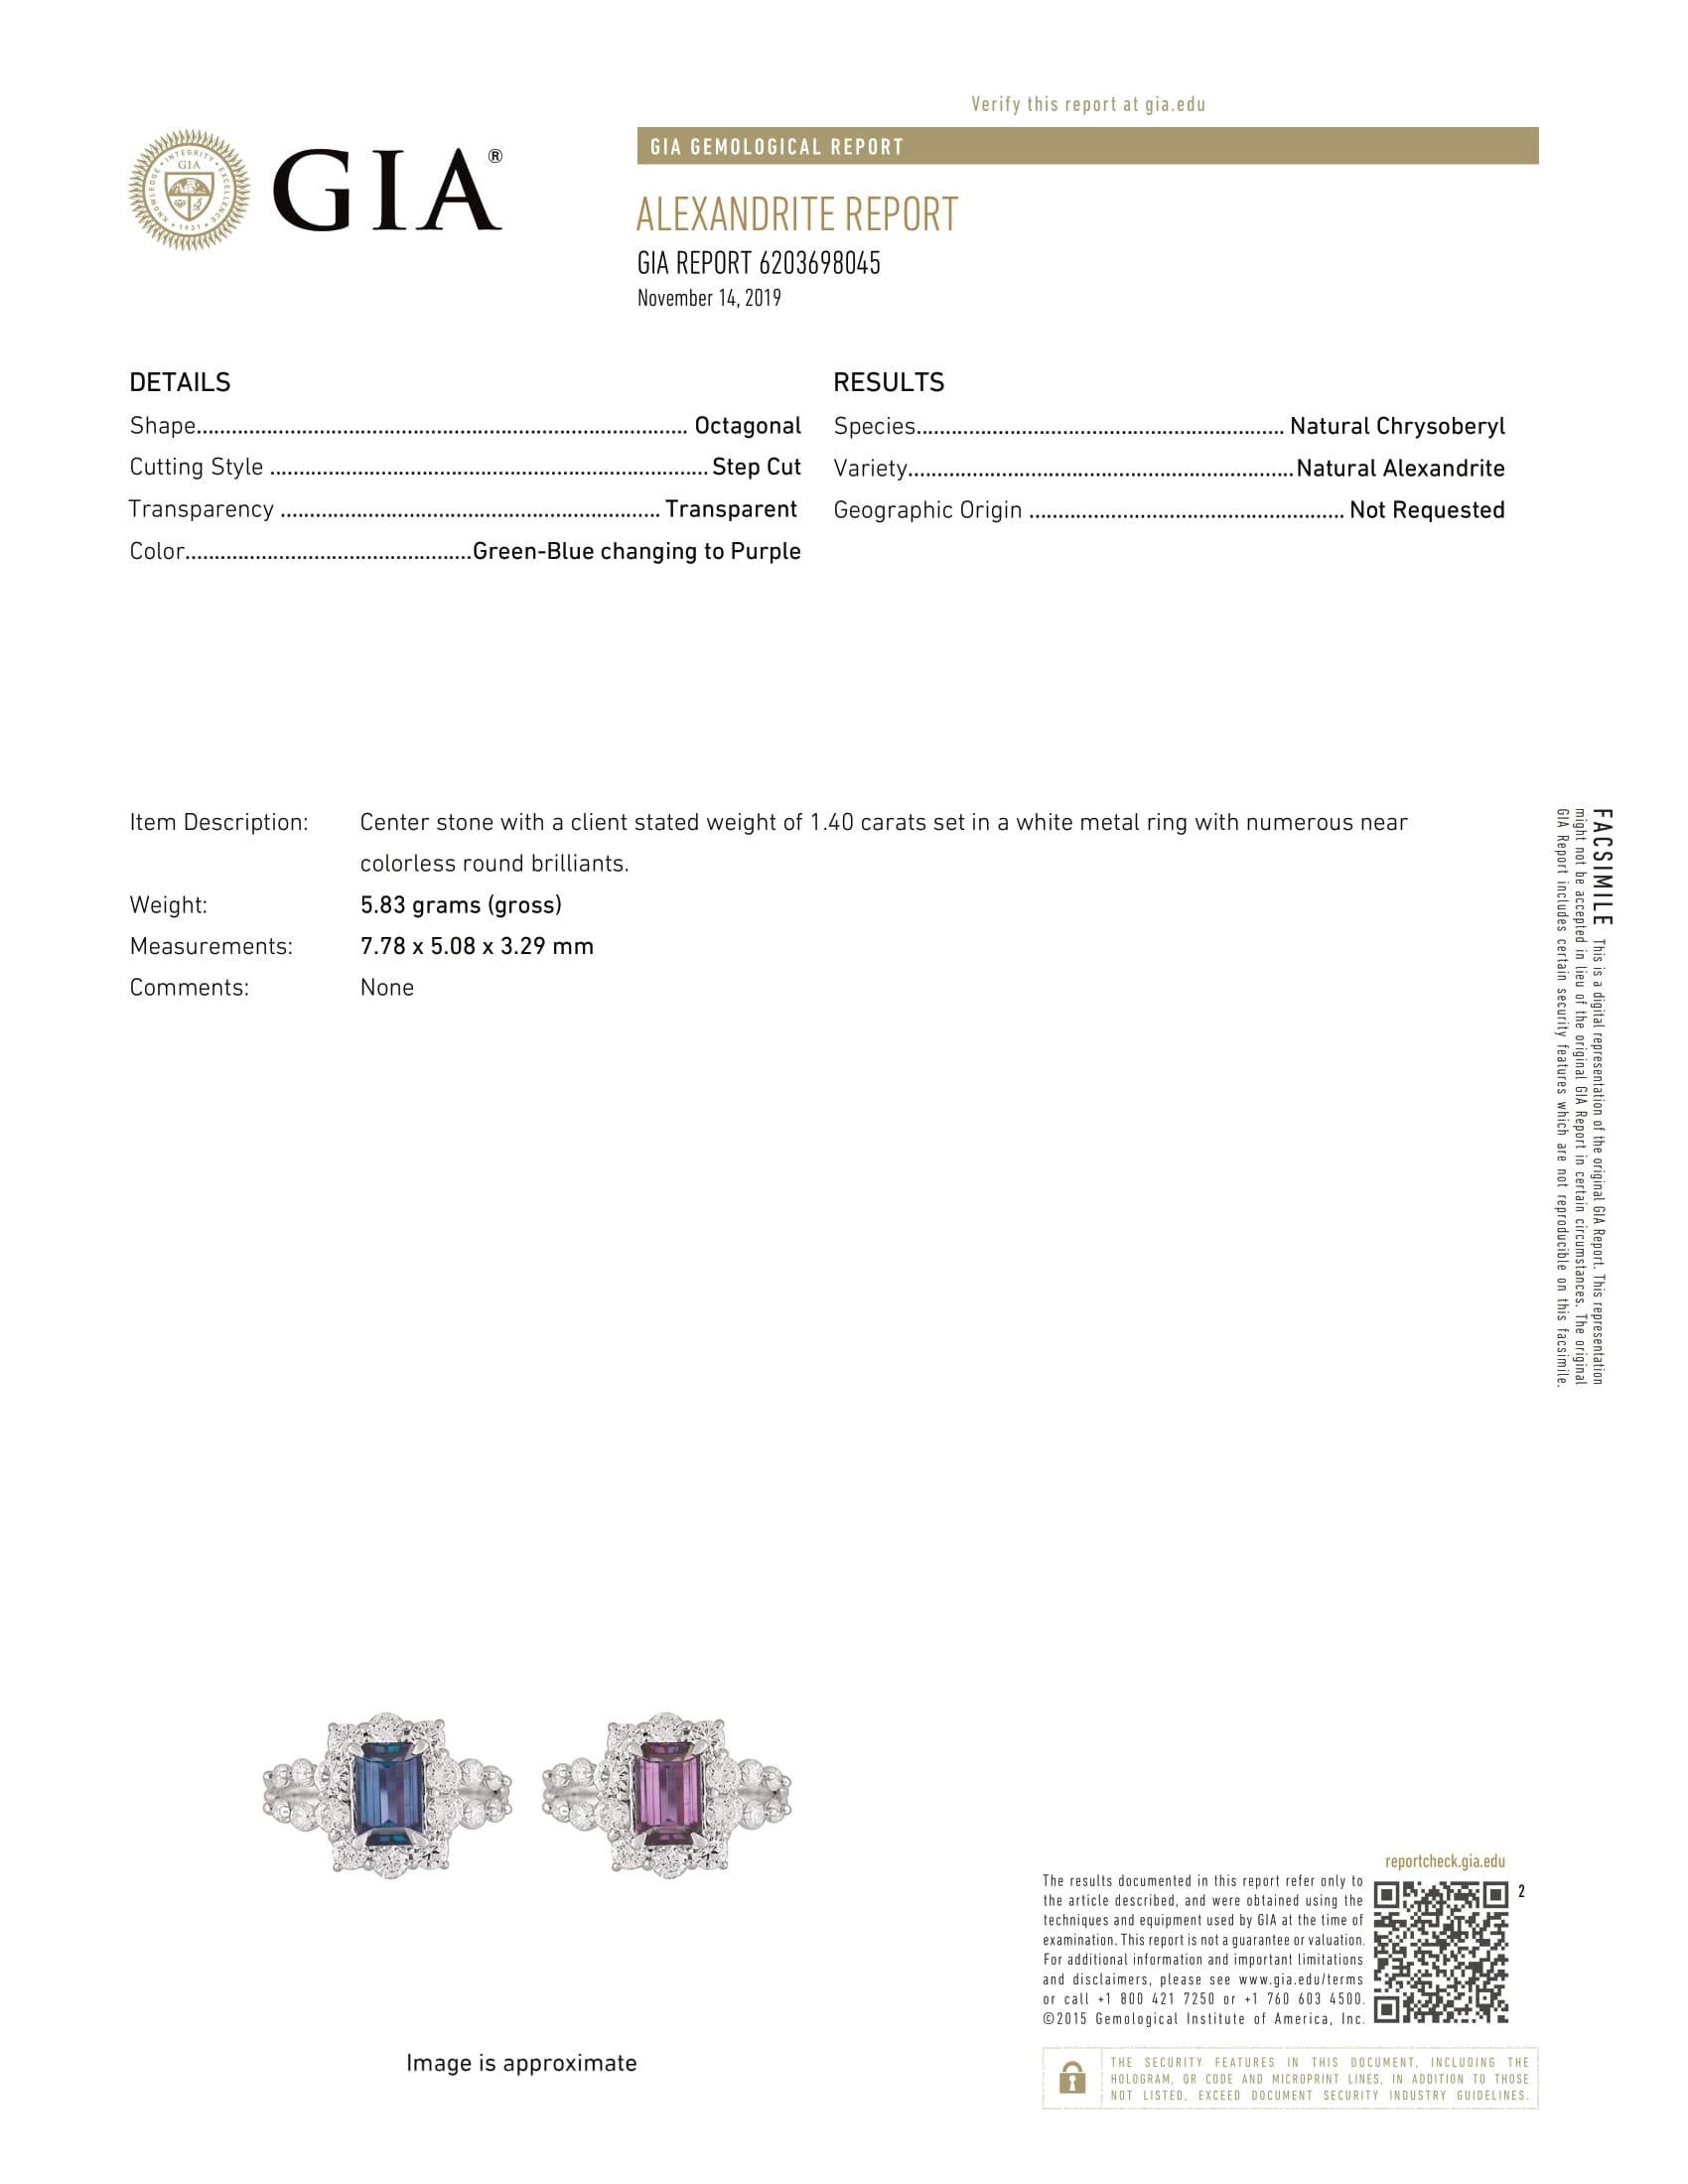 This is a gorgeous natural AAA quality E-Cut Alexandrite surrounded by dainty diamonds that is set in a cocktail platinum setting. This ring features a natural 1.40 carat E-Cut alexandrite that is certified by the Gemological Institute of America